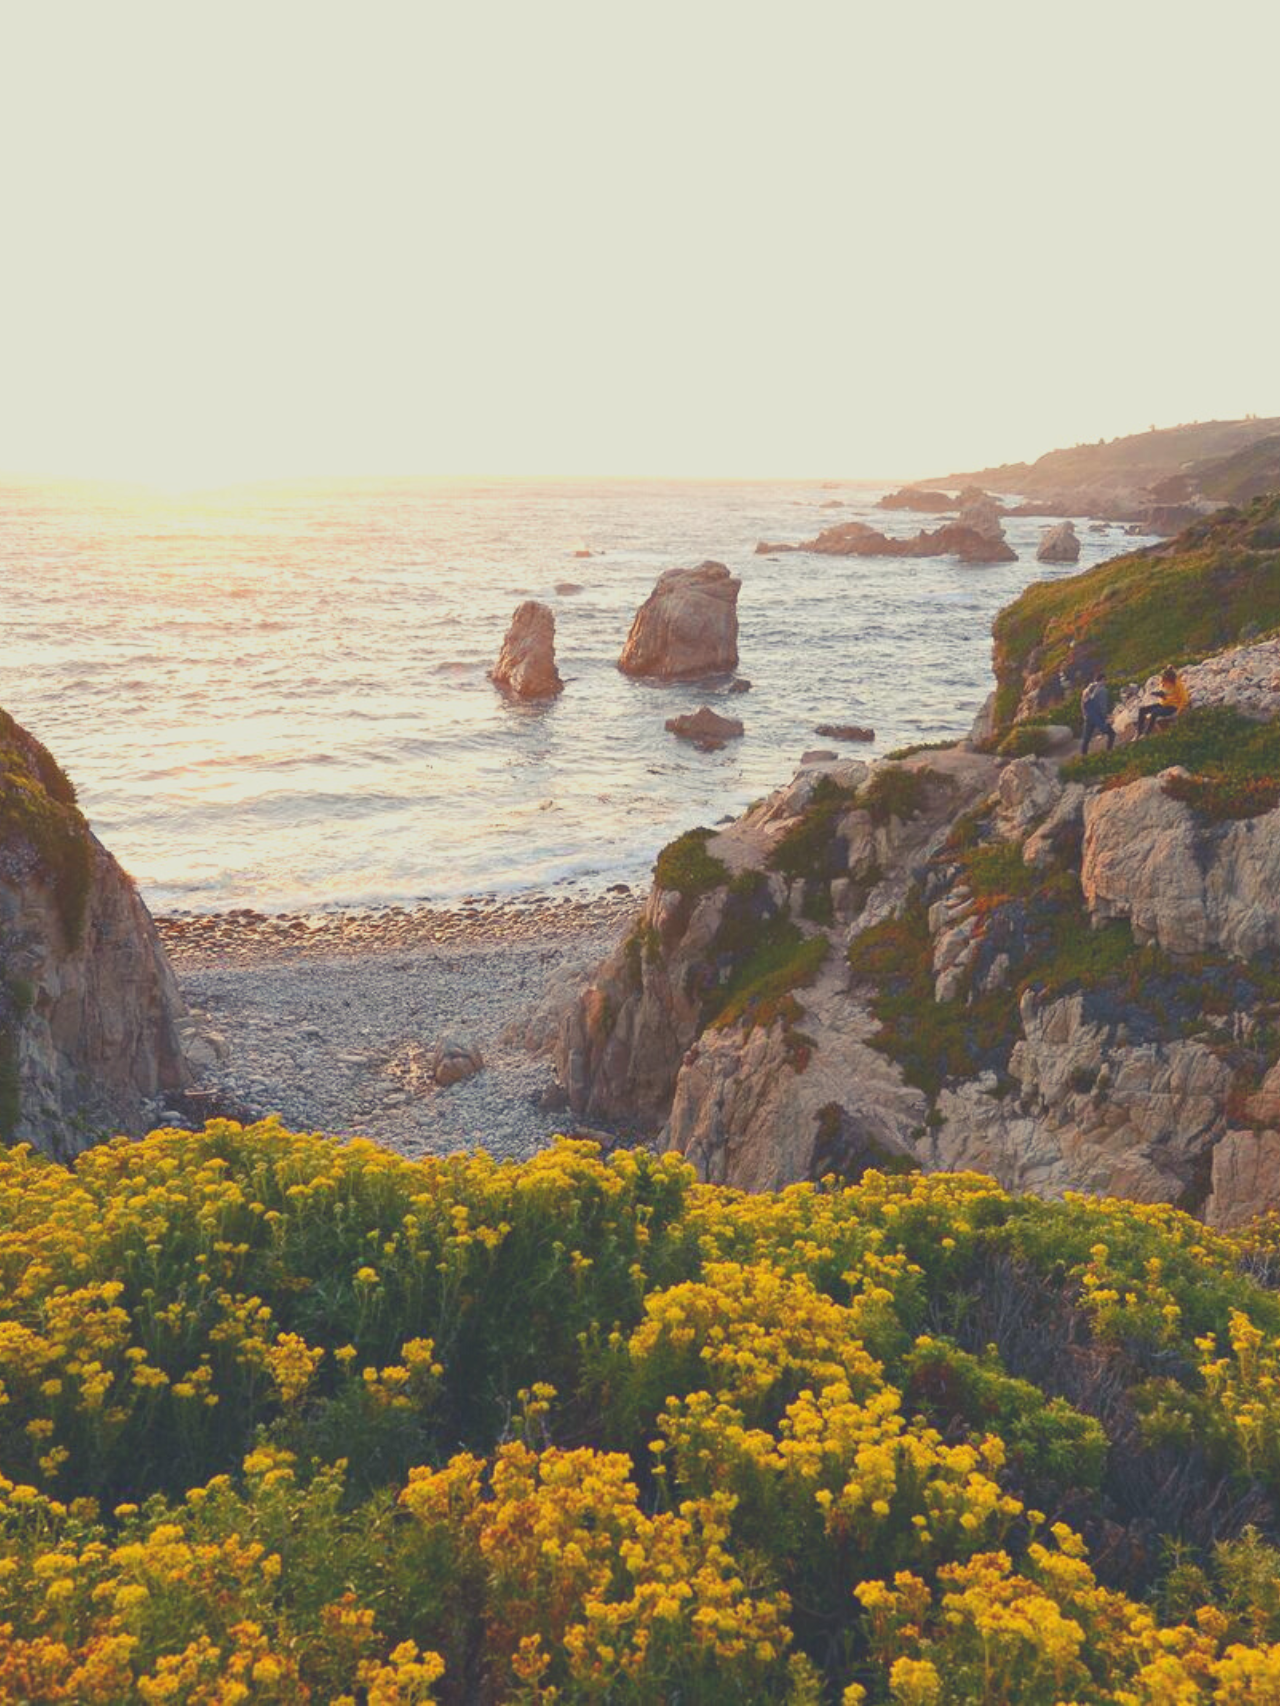 Planning Your Romantic Weekend in Carmel-by-the-Sea